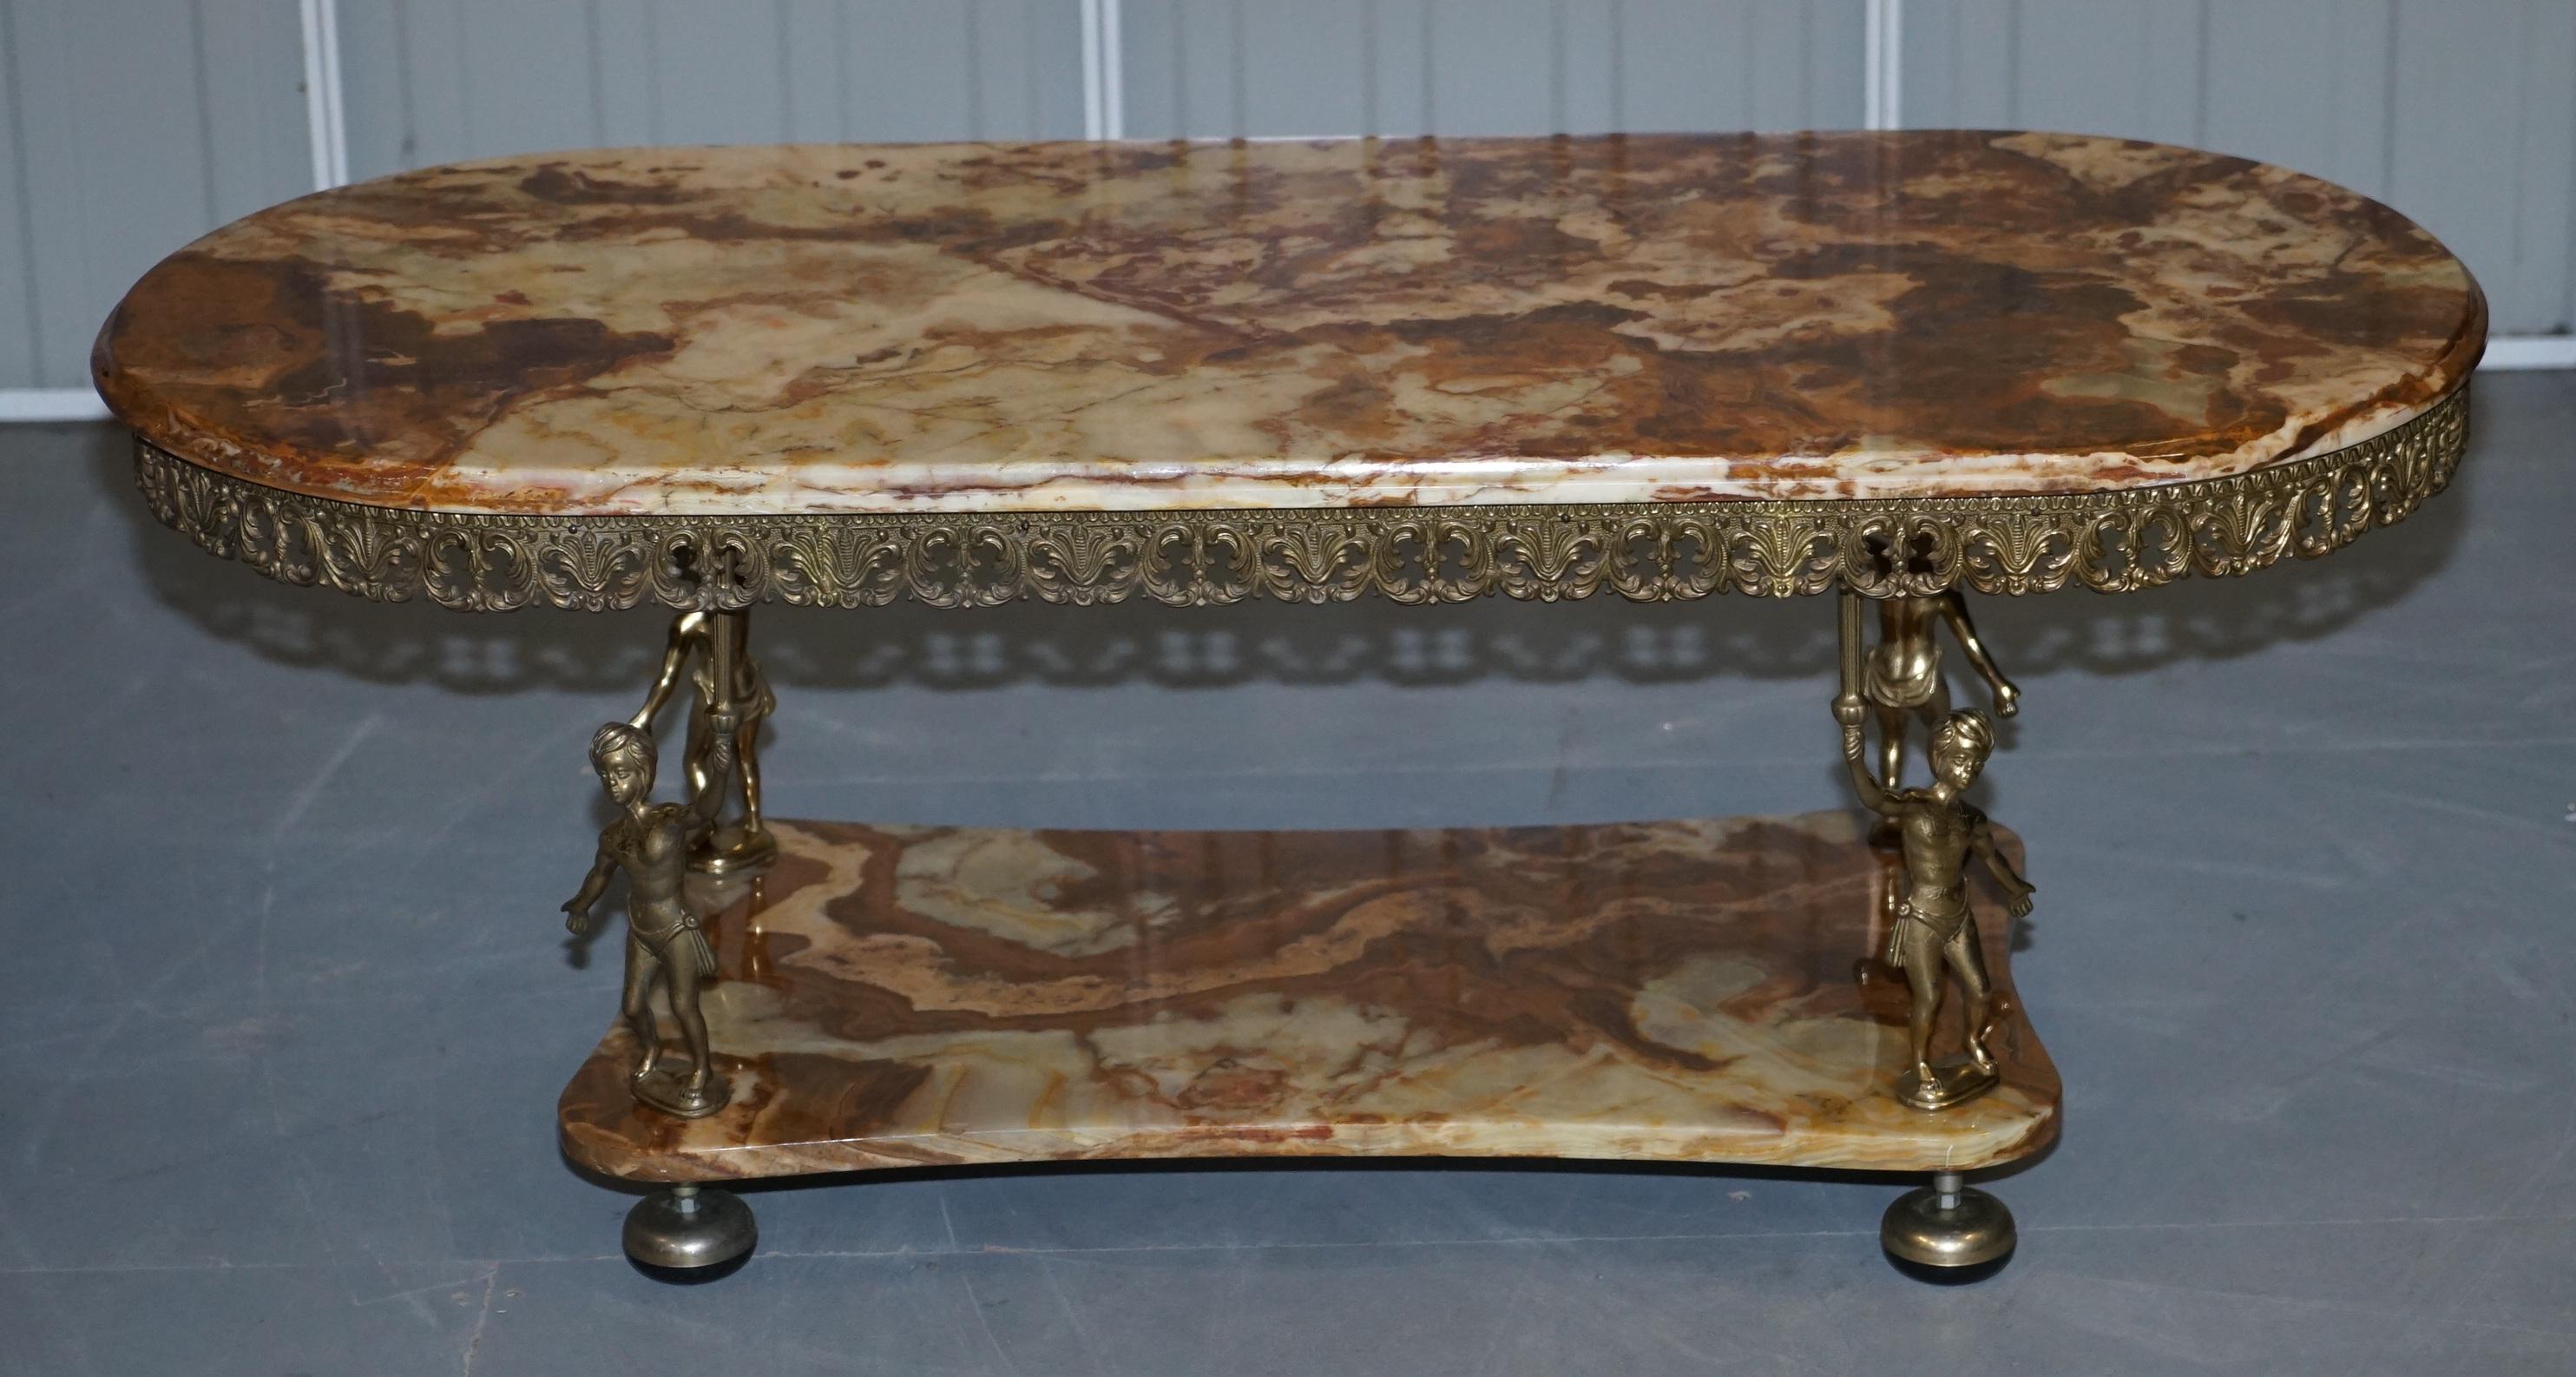 We are delighted to offer for sale this very decorative marble and gilt brass framed coffee or cocktail table

A very good looking and well made piece with a lot of high quality detailing. It was sold tome as Marble but it could be Onyx 

We